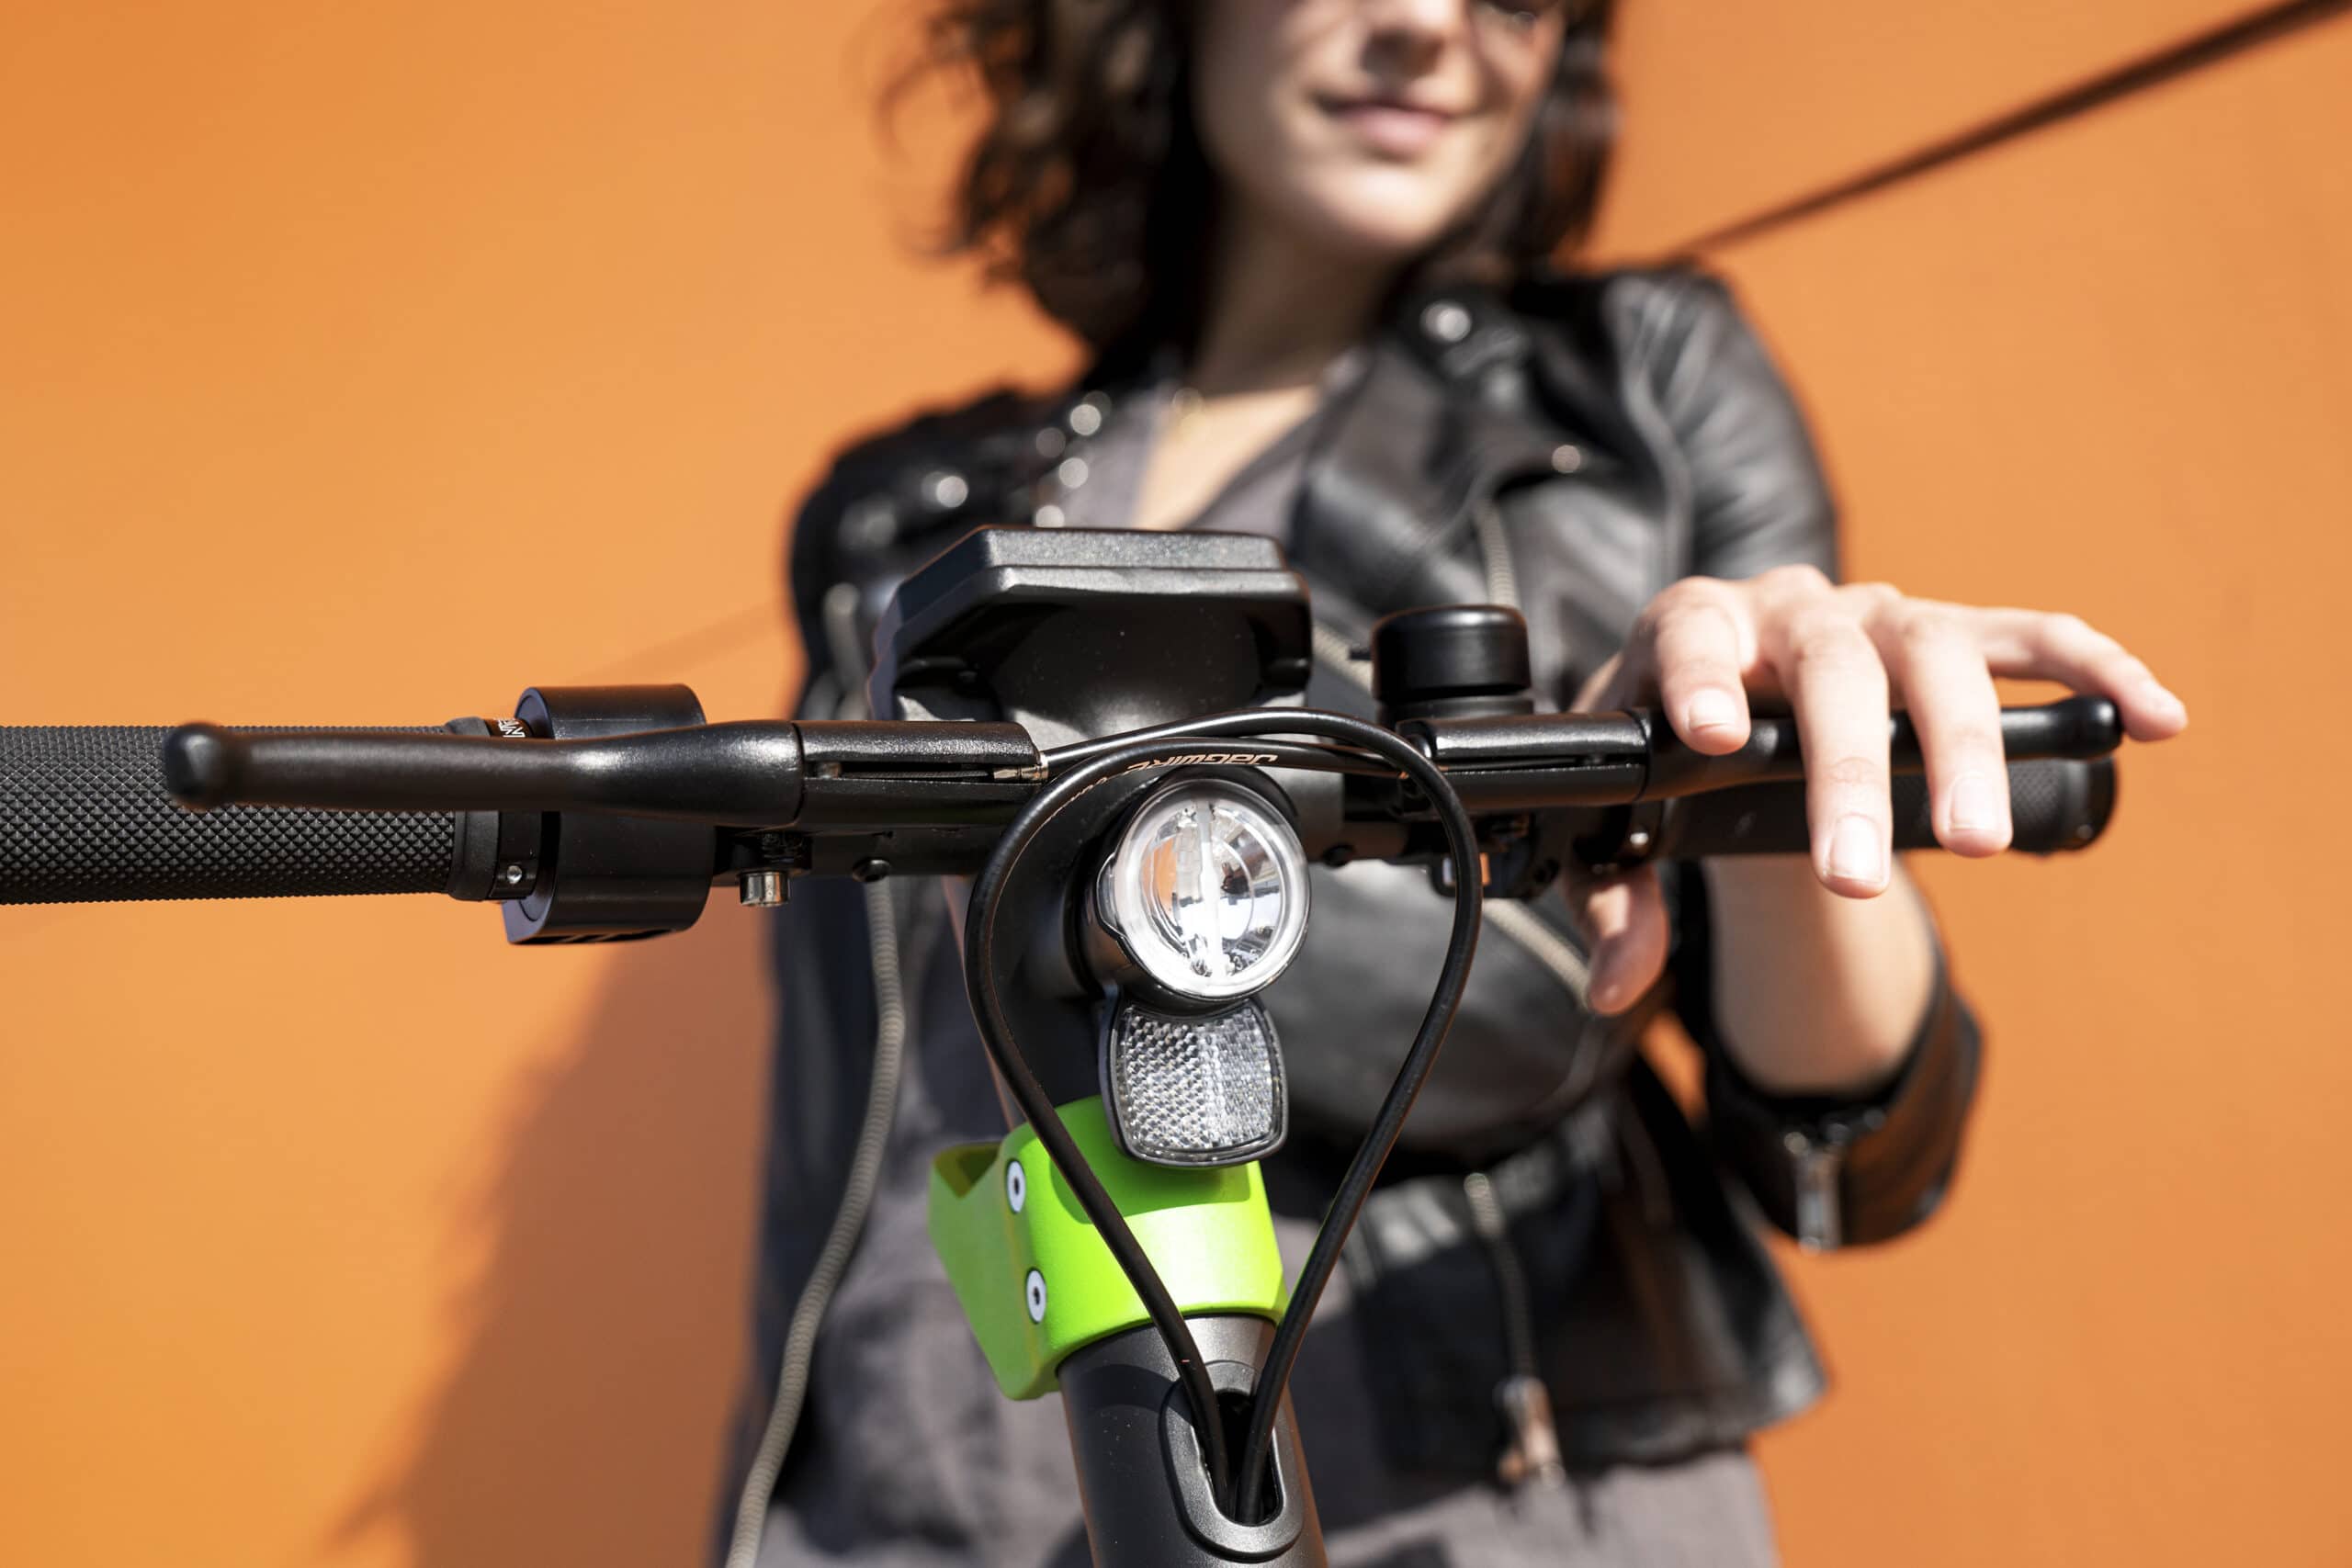 A close up of an electric scooter's handlebar